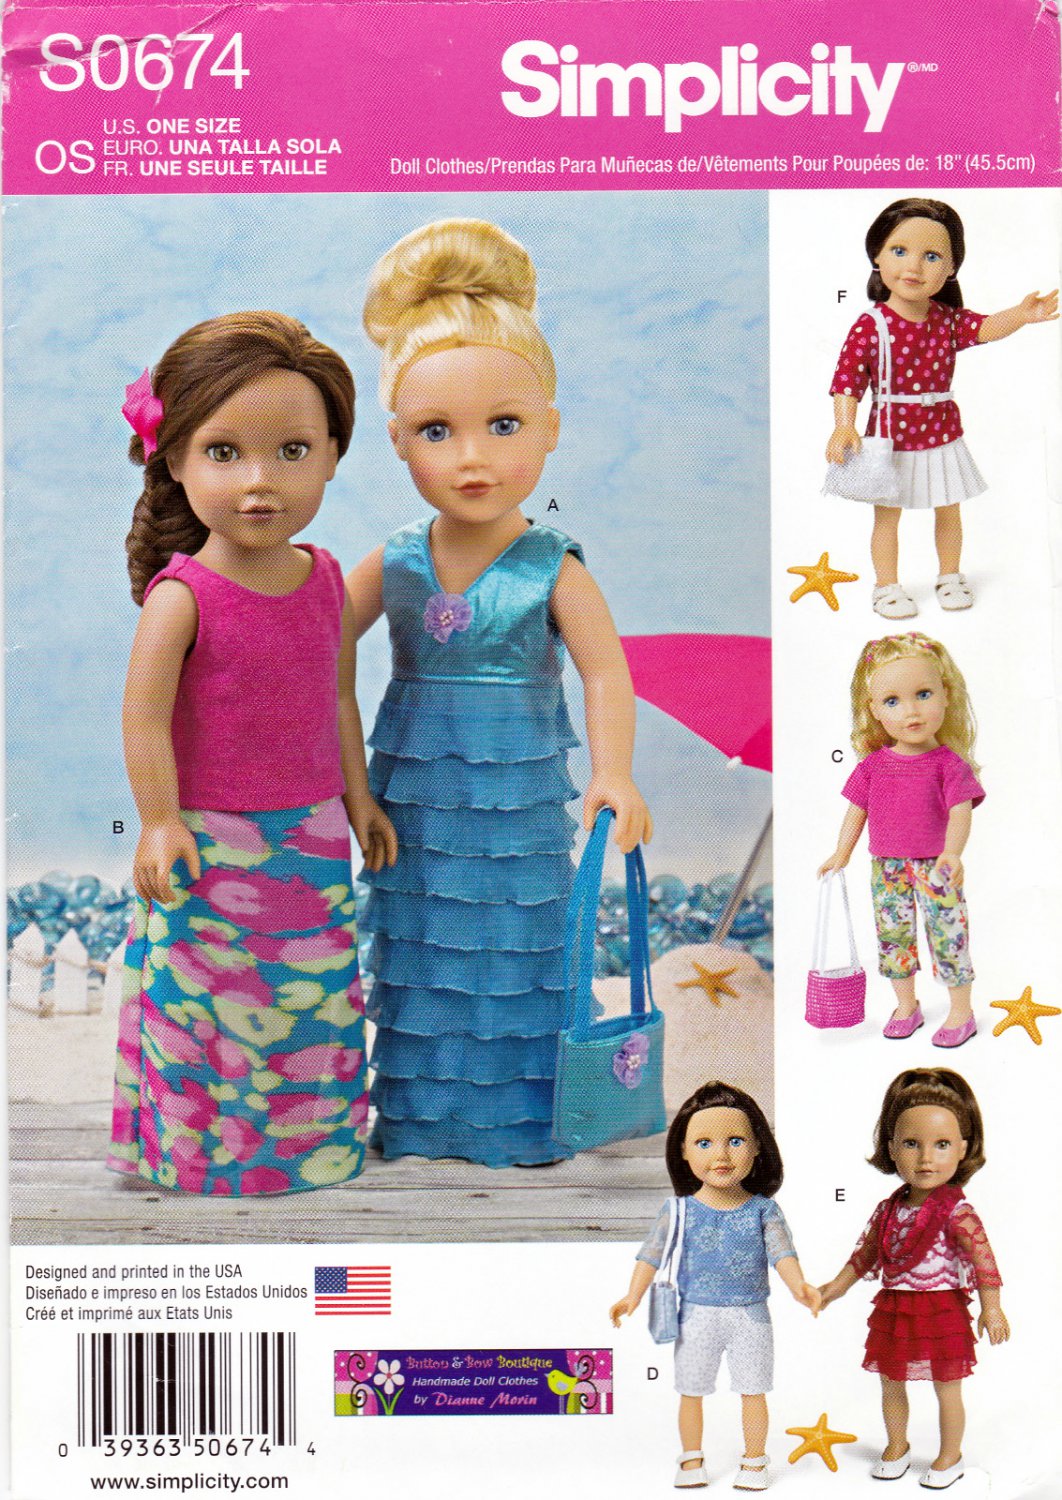 Simplicity S0674 or 1178 Crafts 18" Doll Clothes Sewing Pattern Summer Dress Skirt Top Shorts OSZ